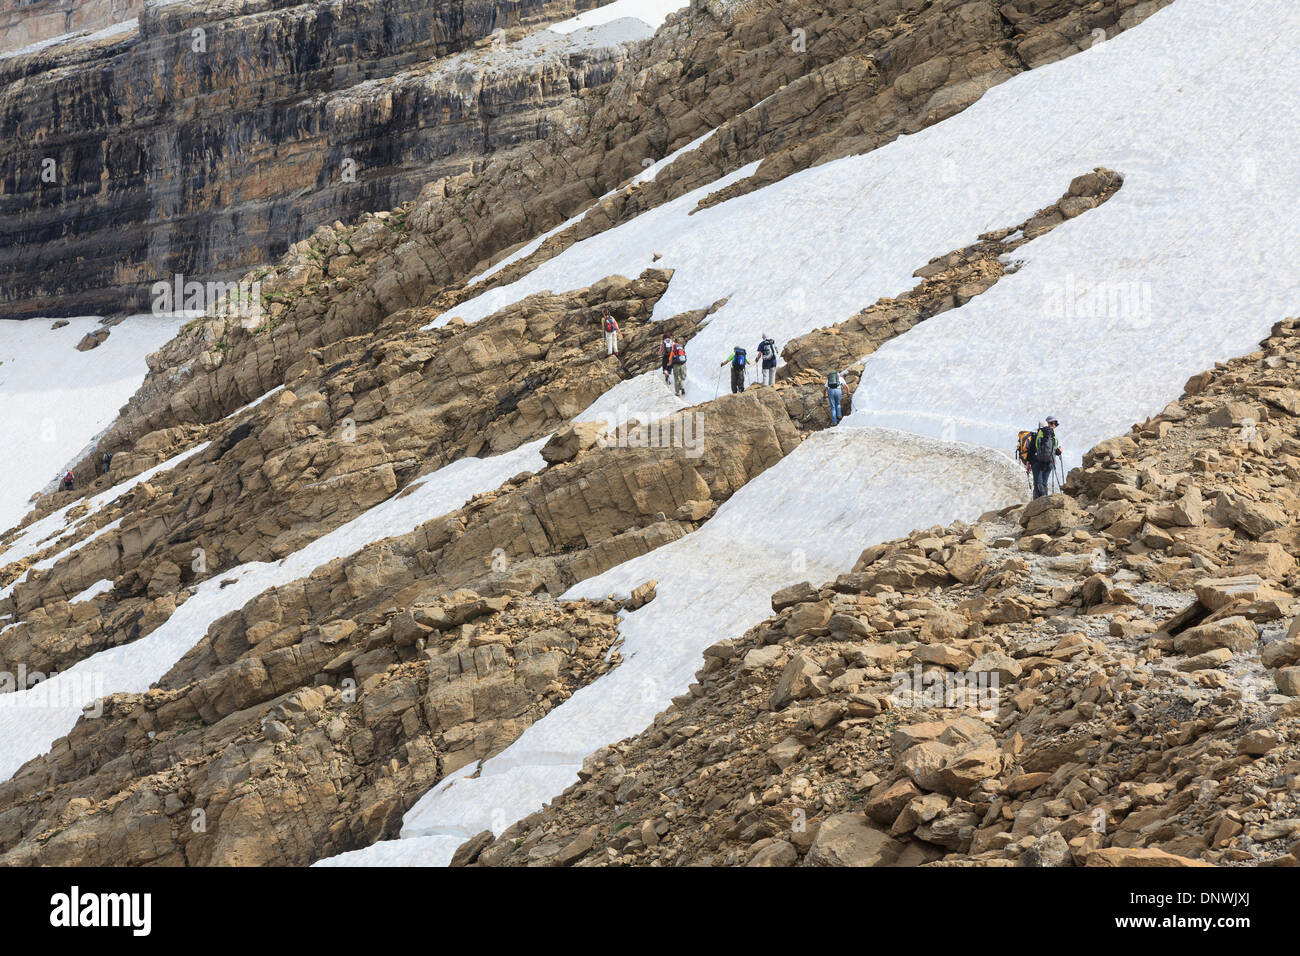 Hikers on their way to Refuge des Sarradets. Cirque de Gavarnie. Pyrenees National Park. France. Stock Photo